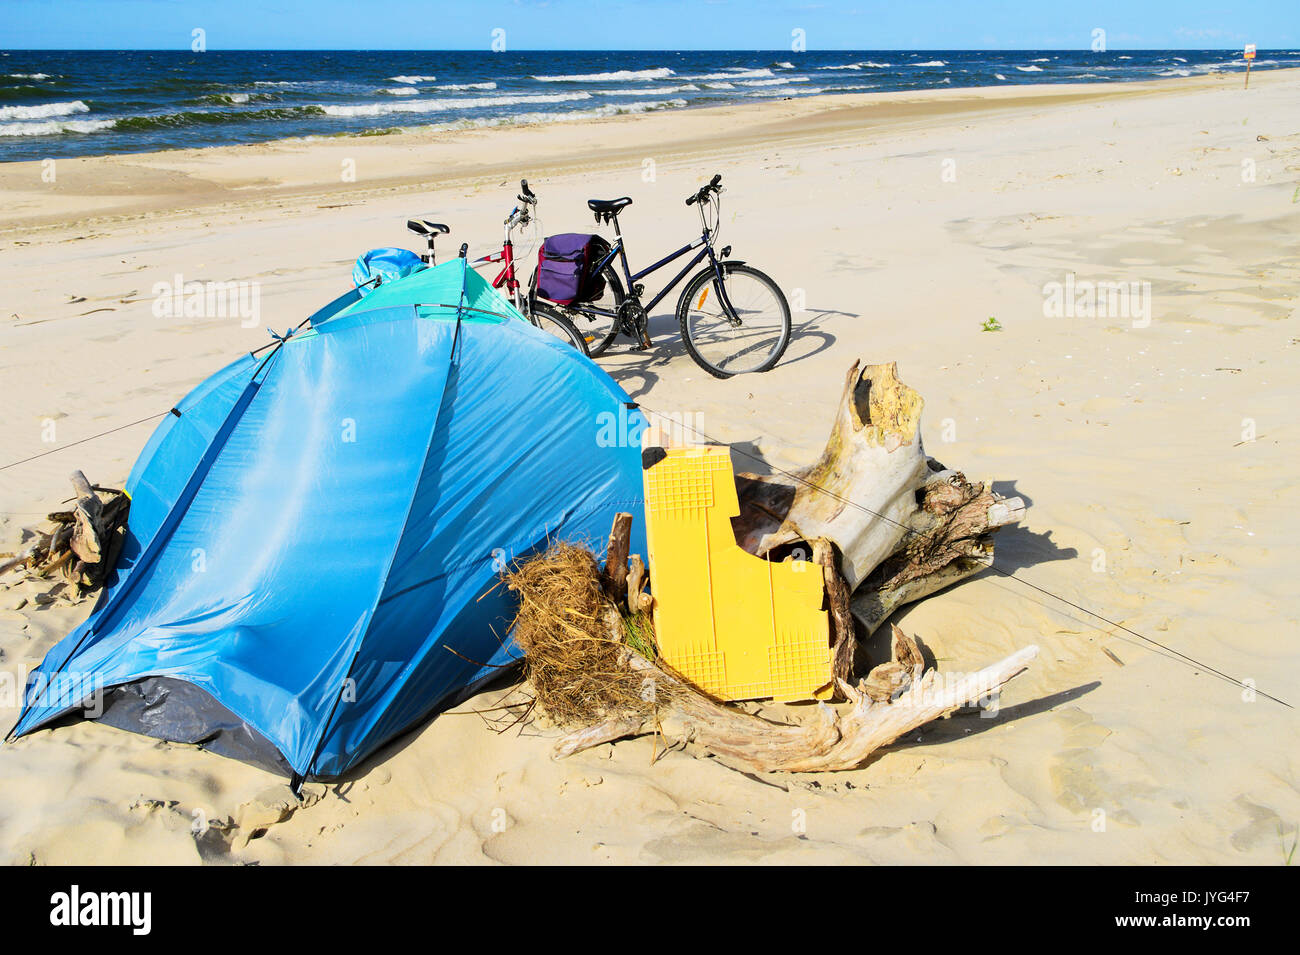 Blue tent and bicycles on wild deserted sandy beach. Camp at the Baltic sea coast. Bicycle tourism. Stegna, Pomerania, Poland. Stock Photo